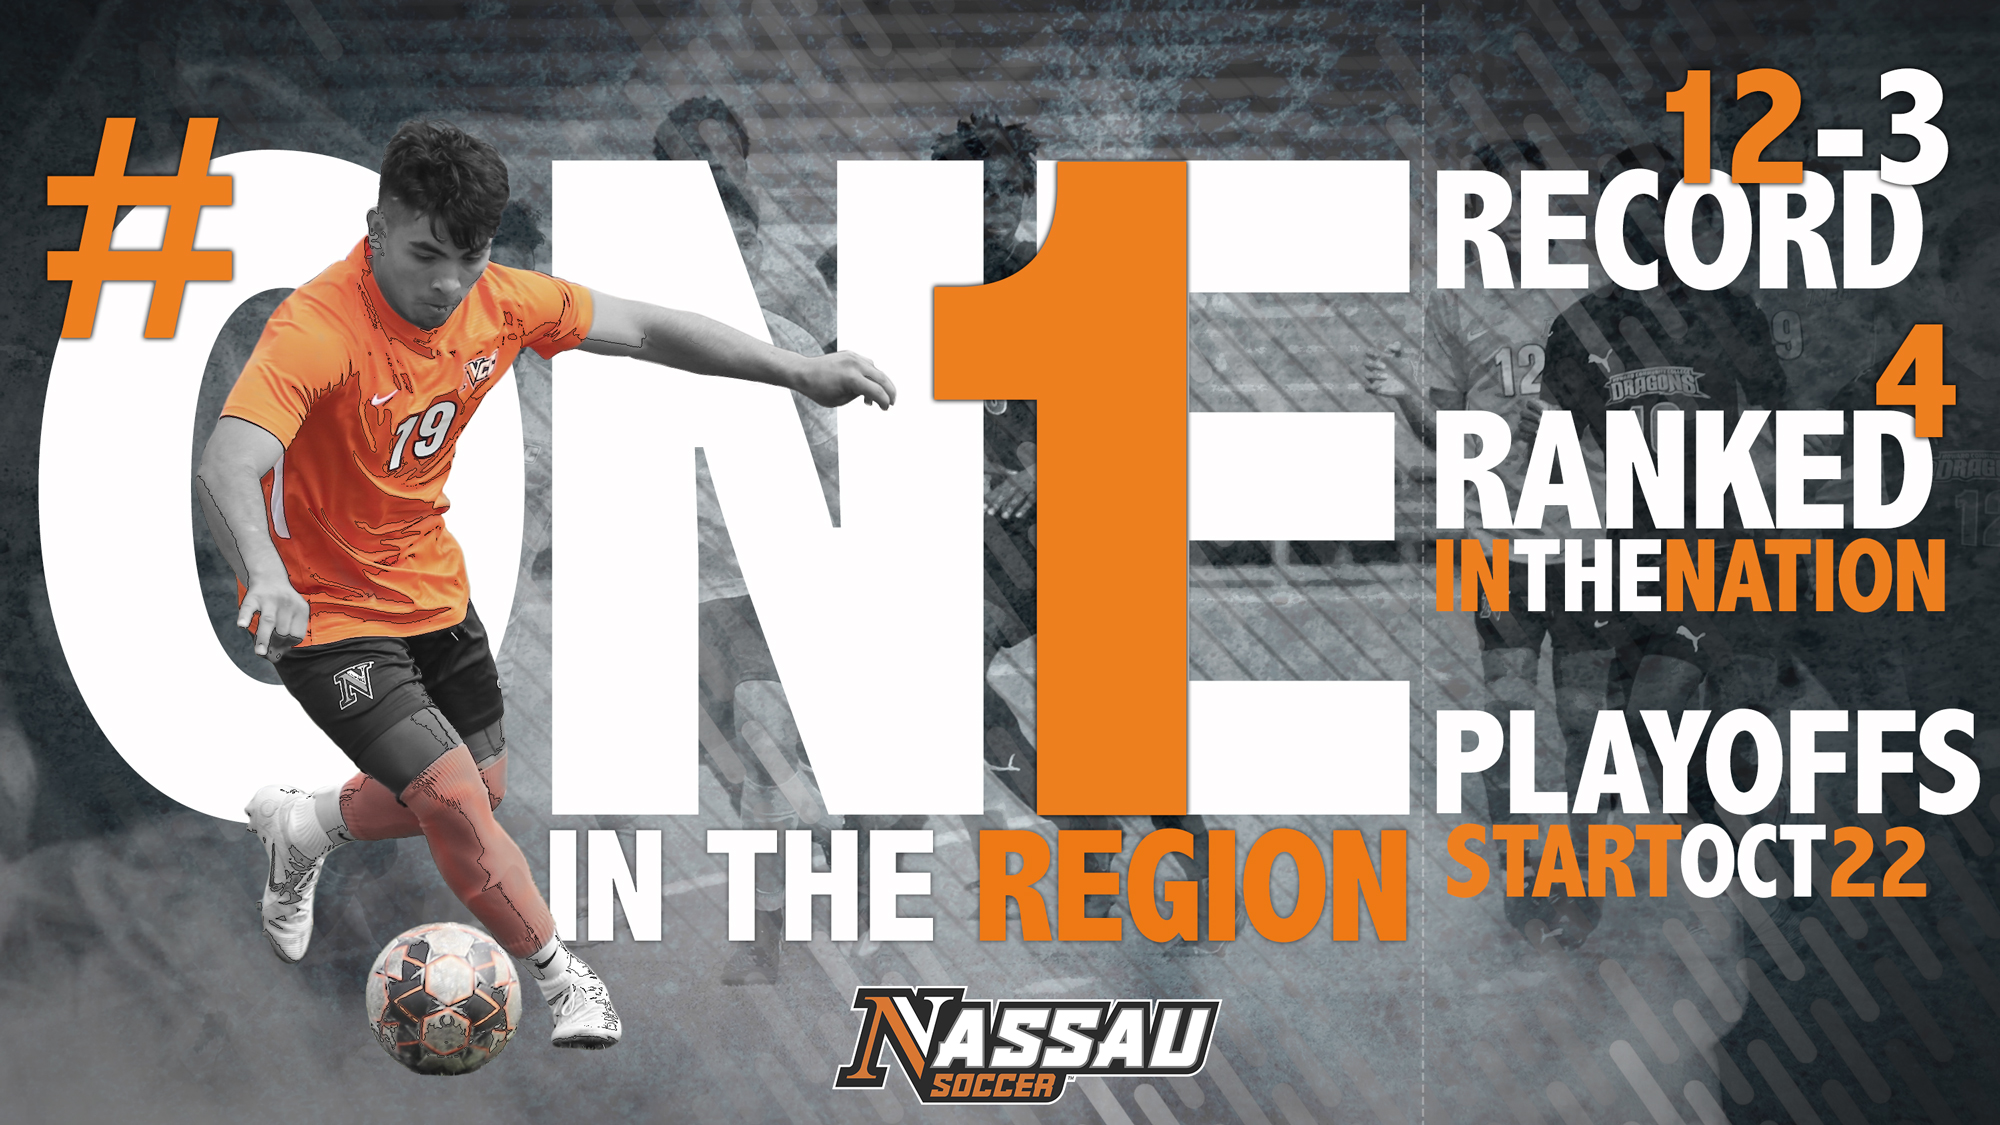 Lions Mens Soccer Team Finish Season First Place In The Region